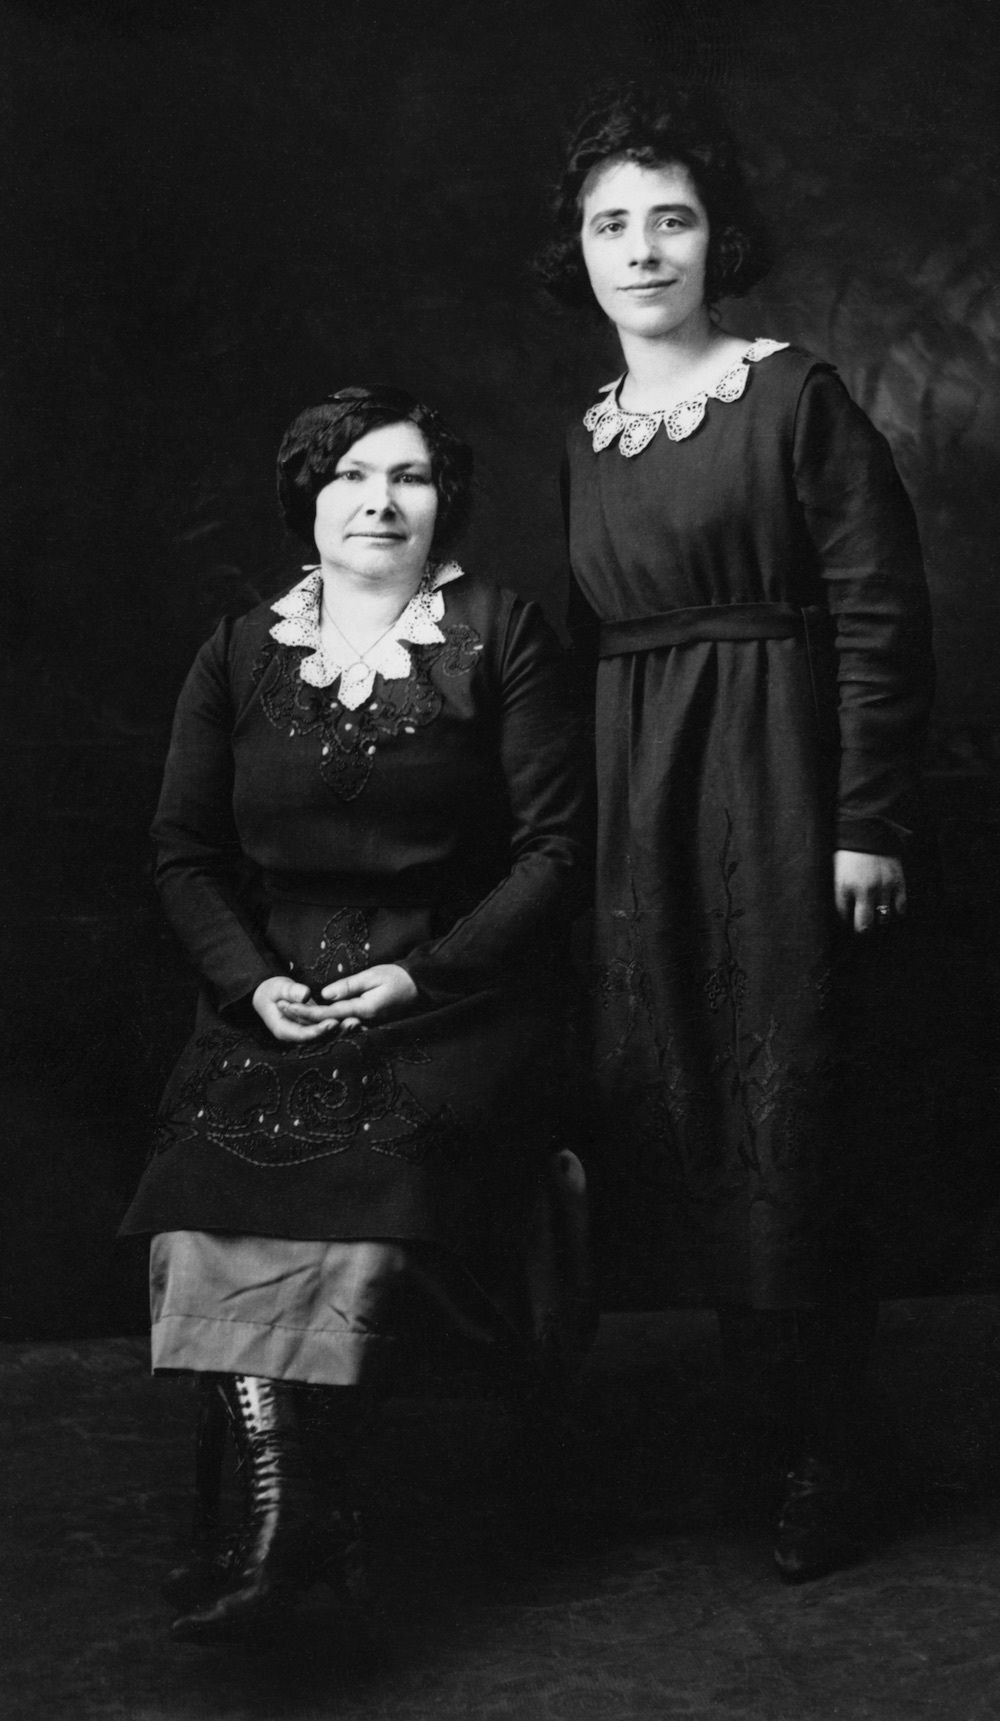 A younger woman standing next to an older woman sitting.